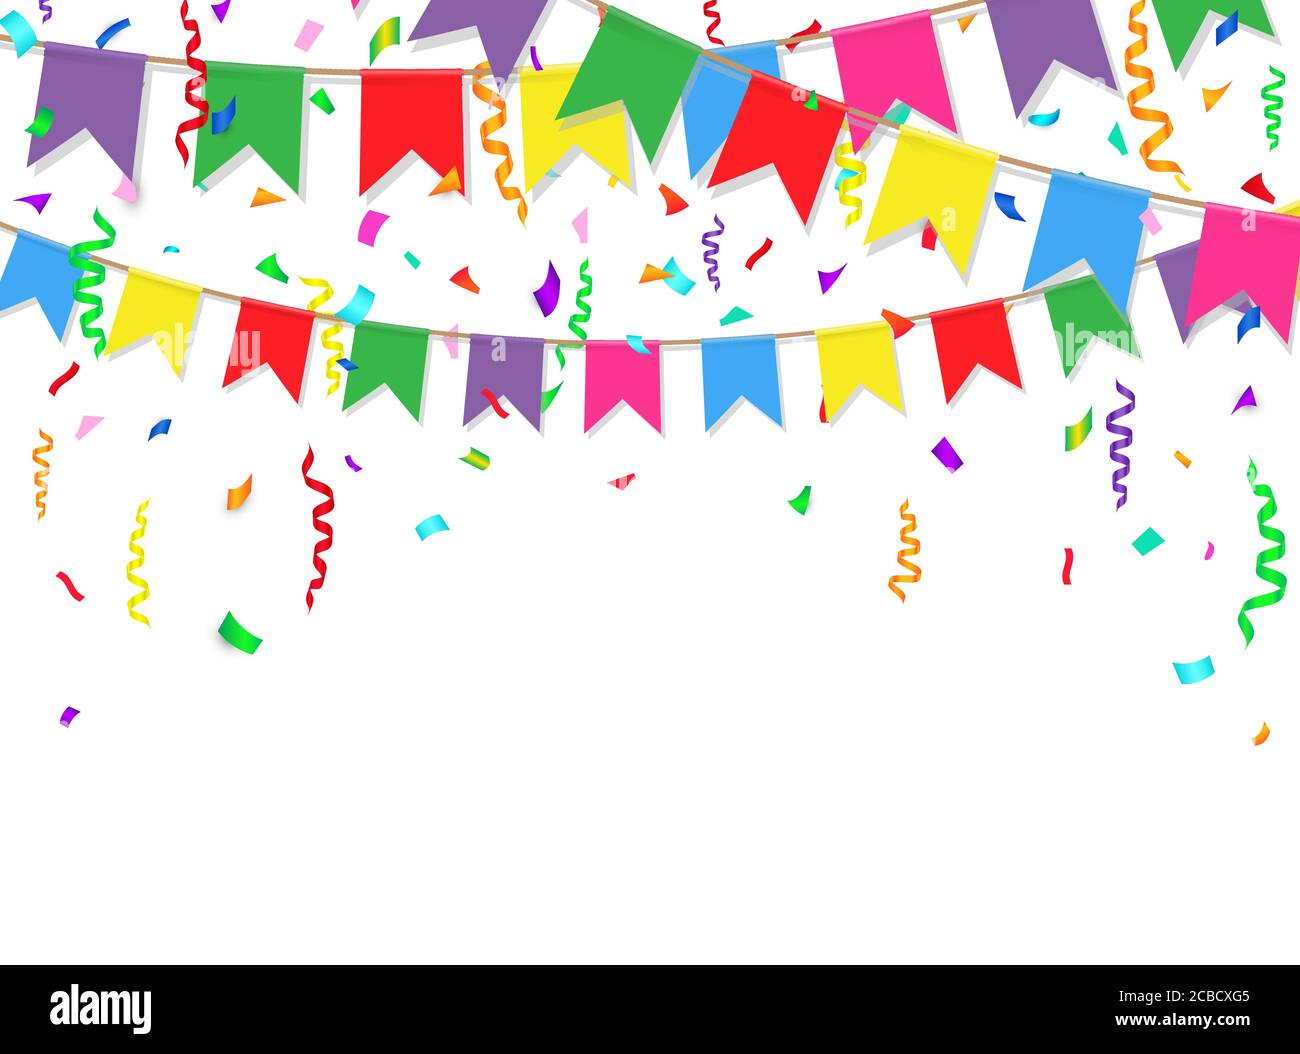 Party background with colorful flags and confetti. Party flags on white background. Vector illustration. Stock Vector